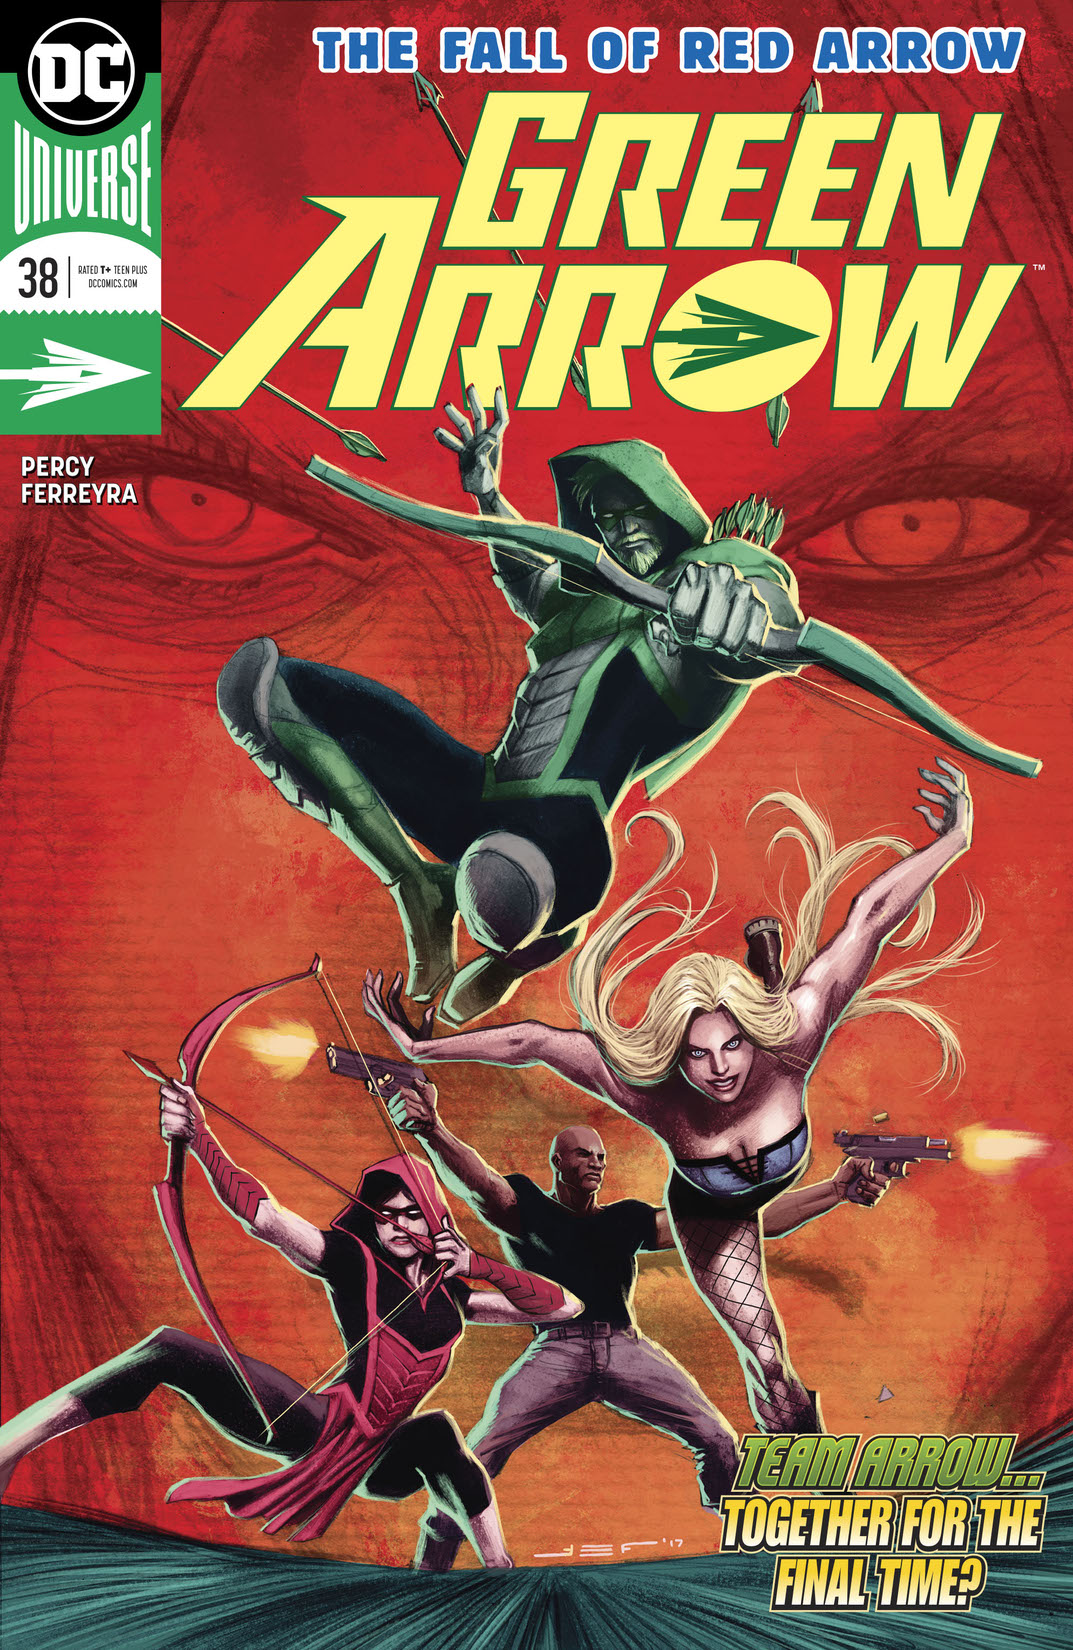 Green Arrow (2016-) #38 preview images